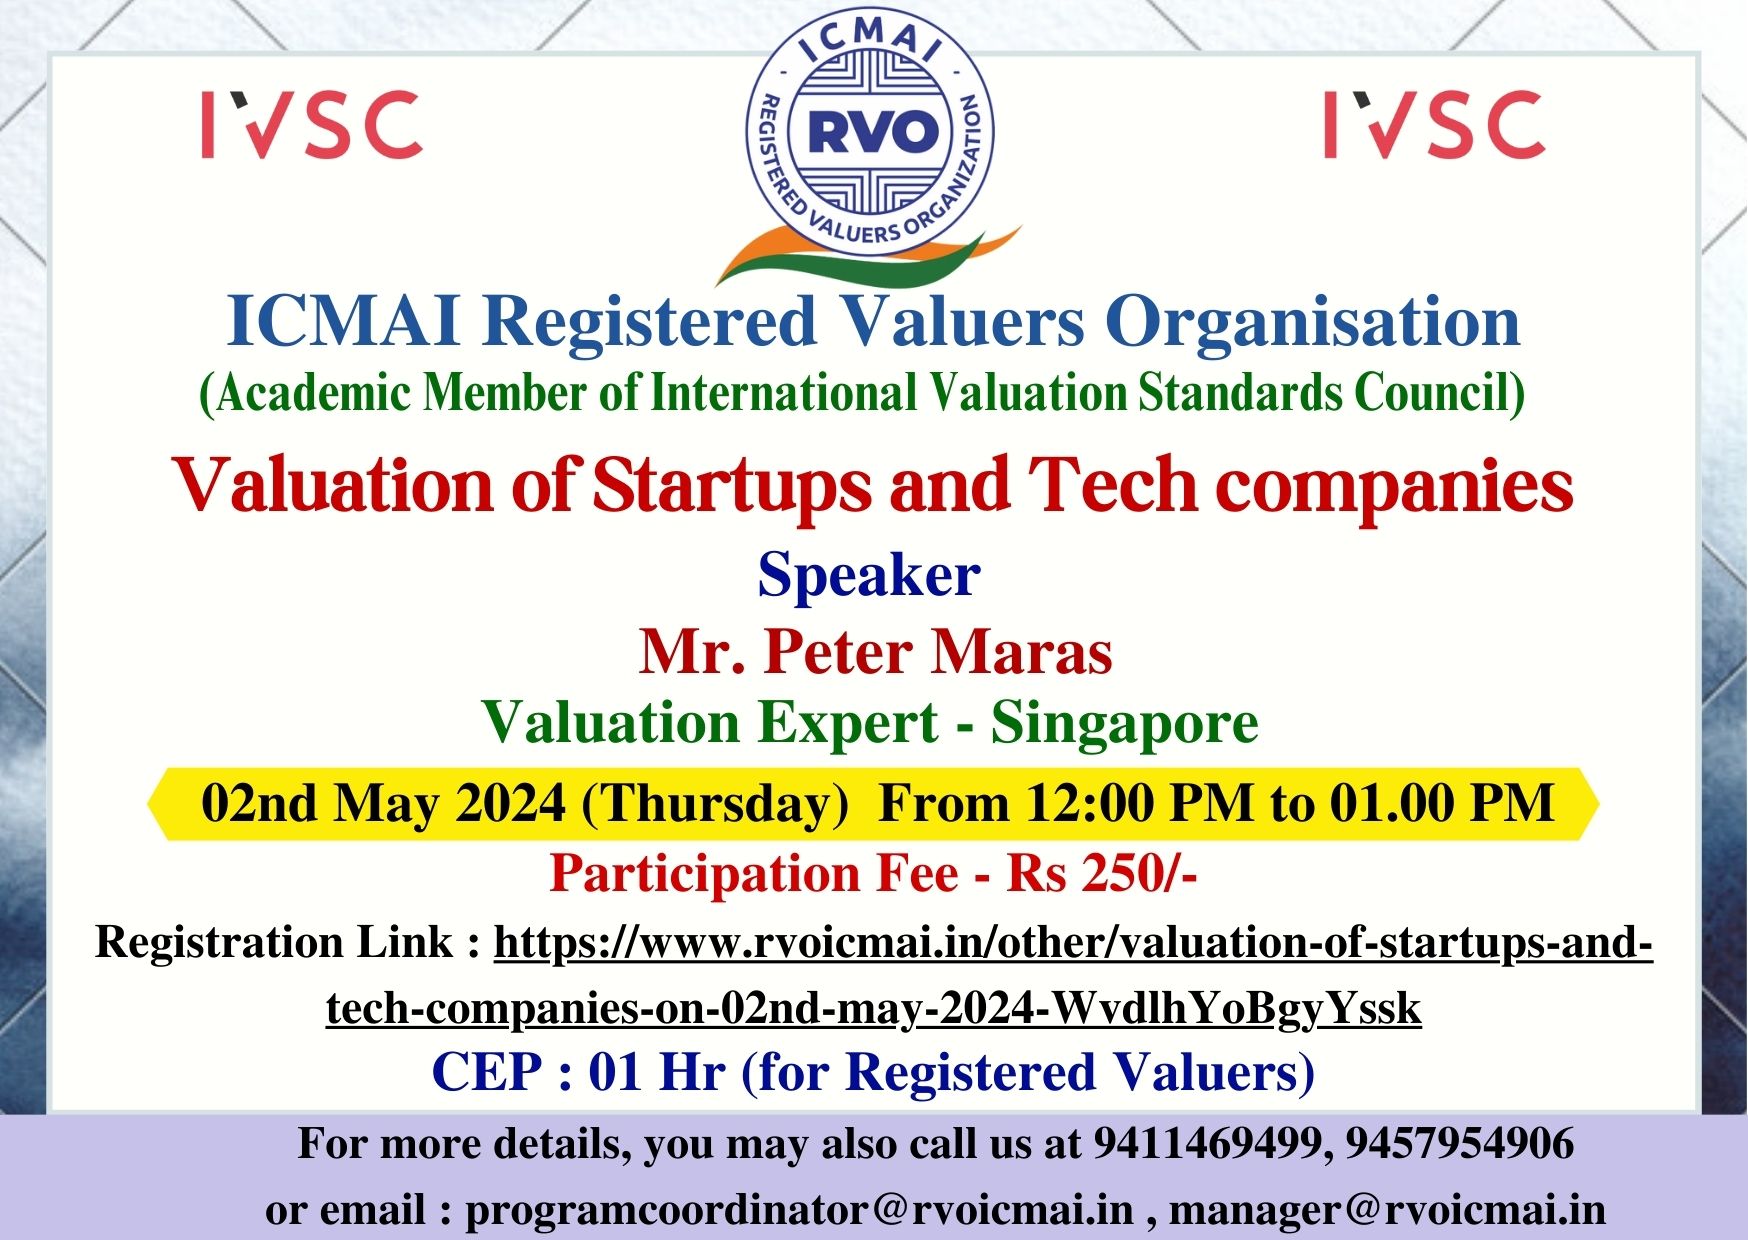 Valuation of Startups and Tech companies on 02nd May 2024